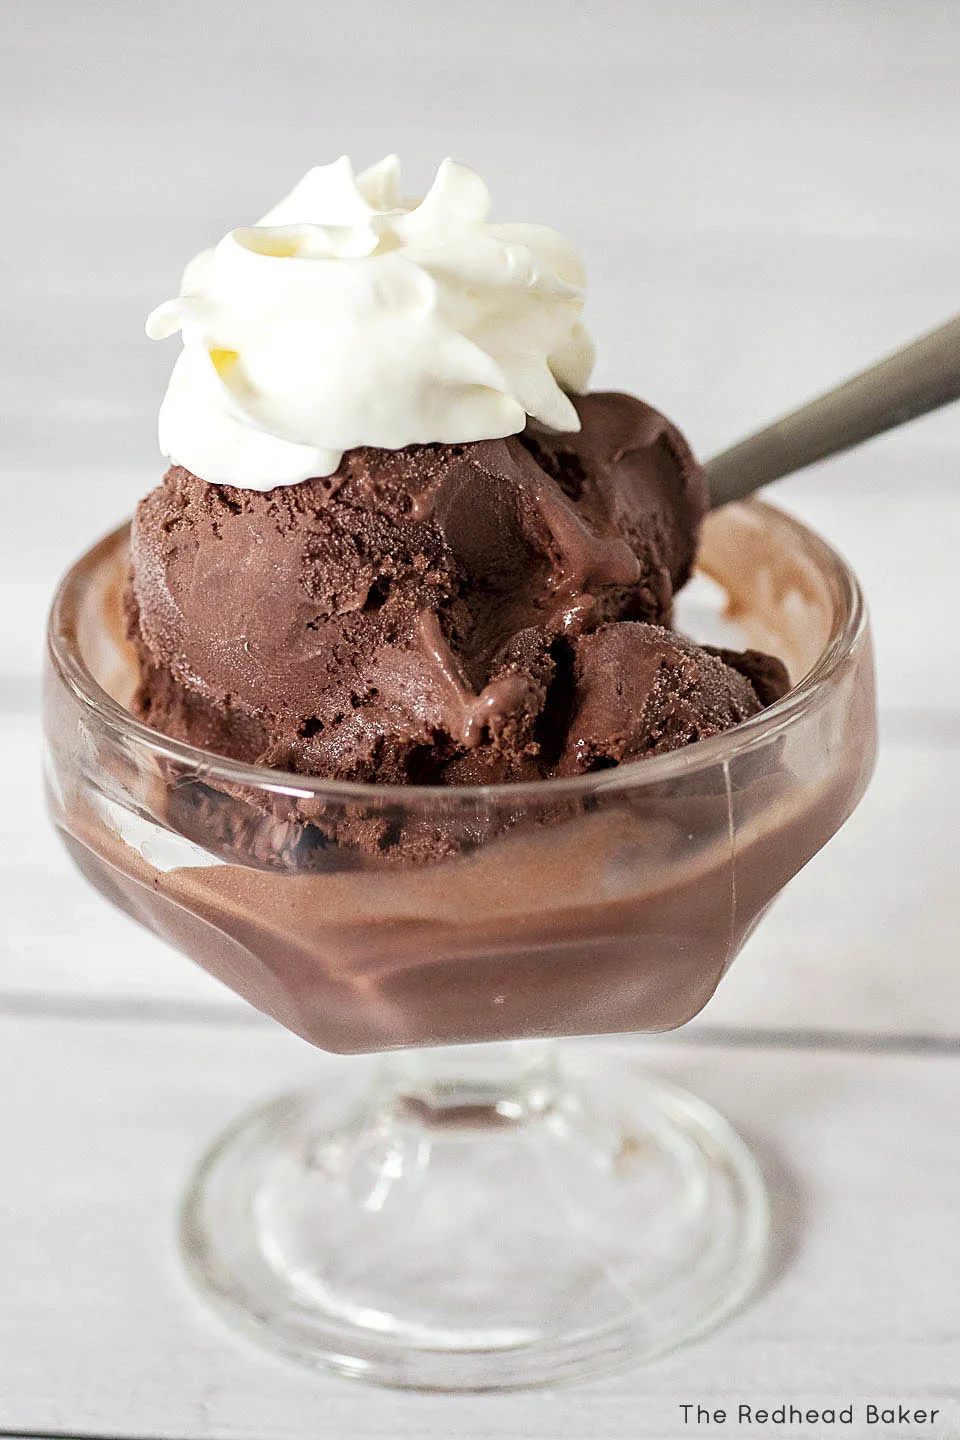 A glass dish of chocolate ice cream topped with whipped cream.